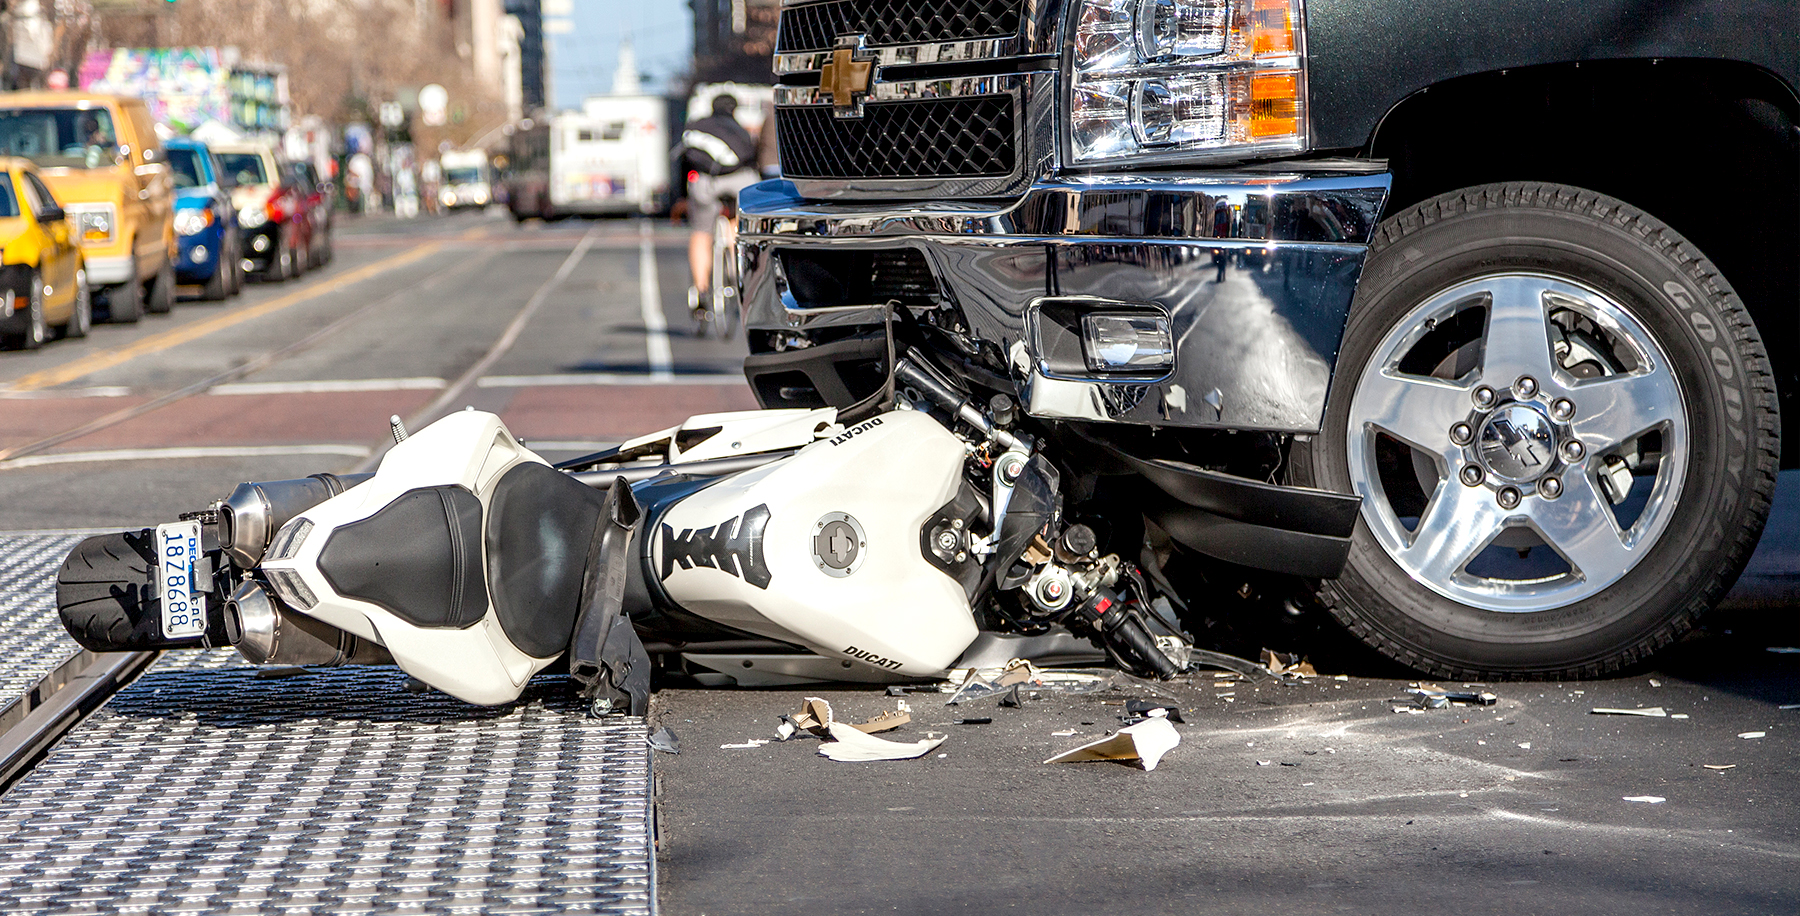 Experiencing a motorcycle accident can be a traumatic and confusing event.